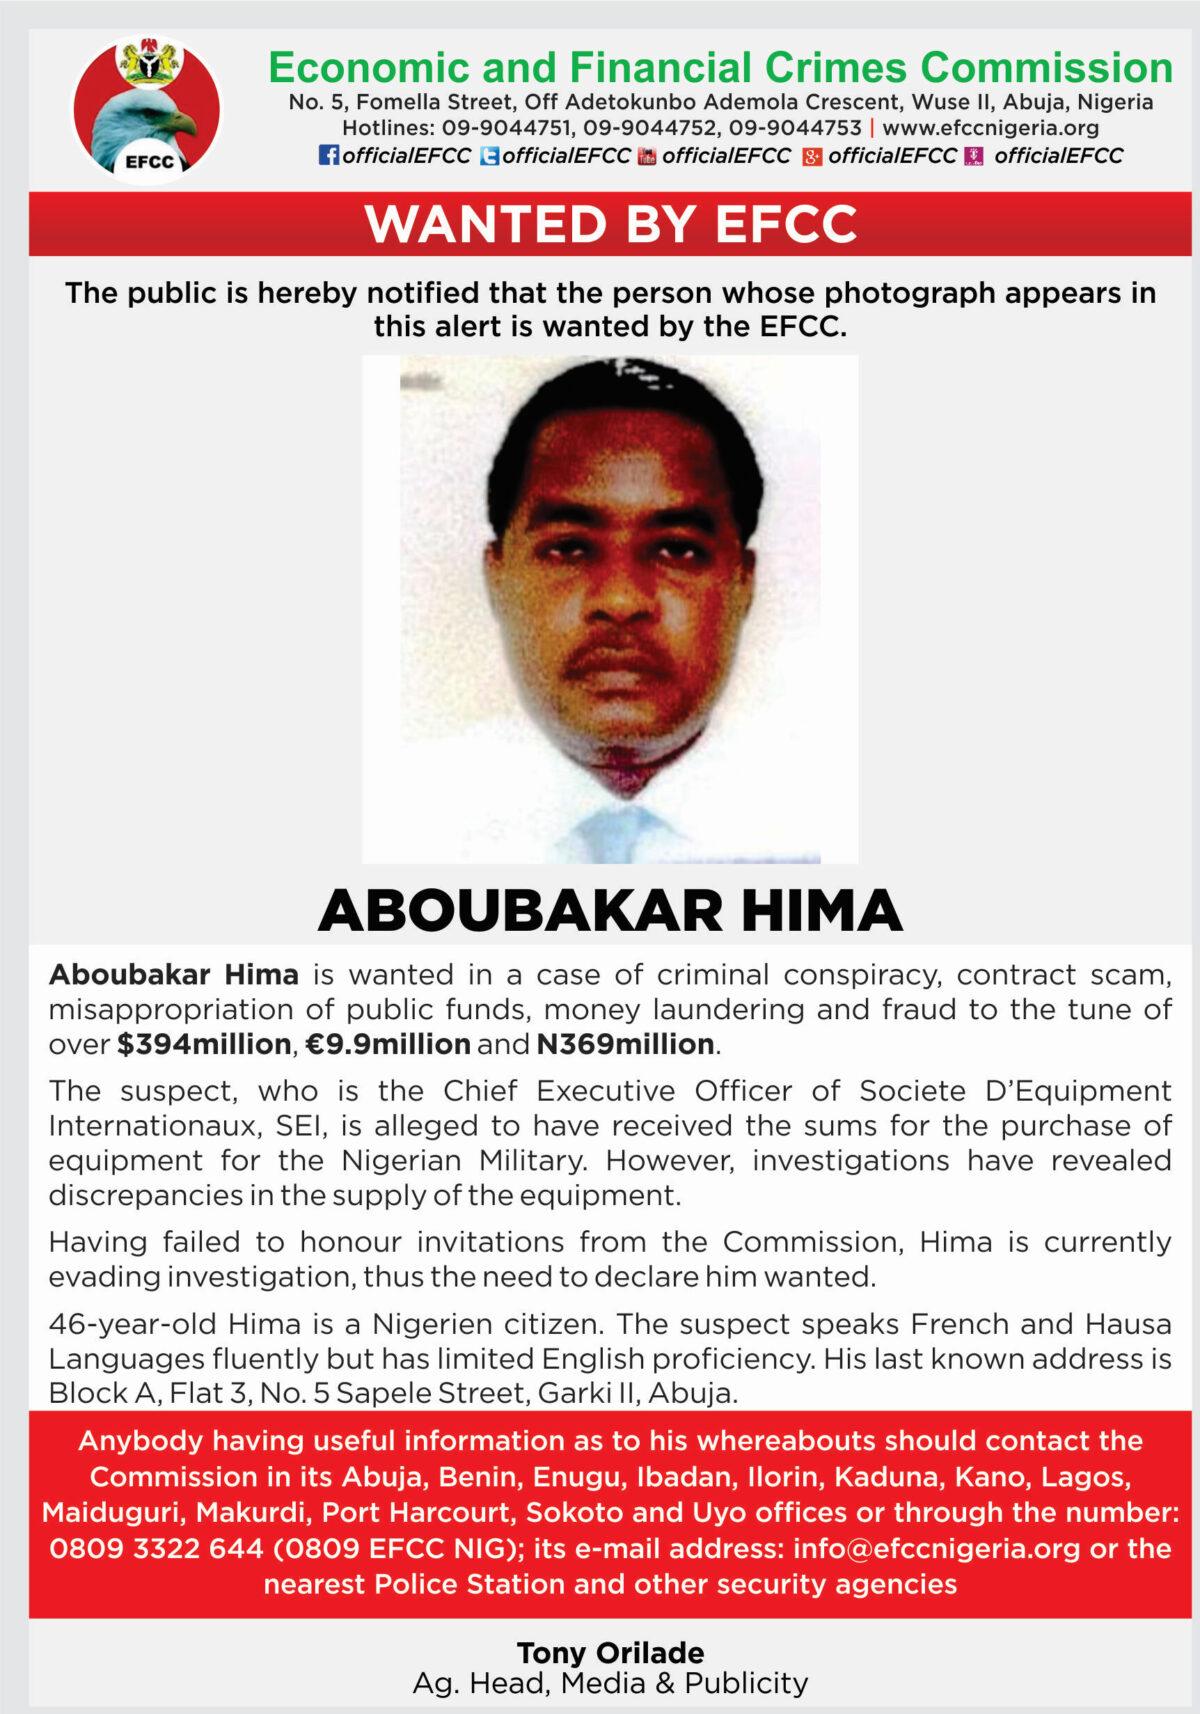 Wanted poster of Aboubakar Hima (Economic and Financial Crimes Commission)